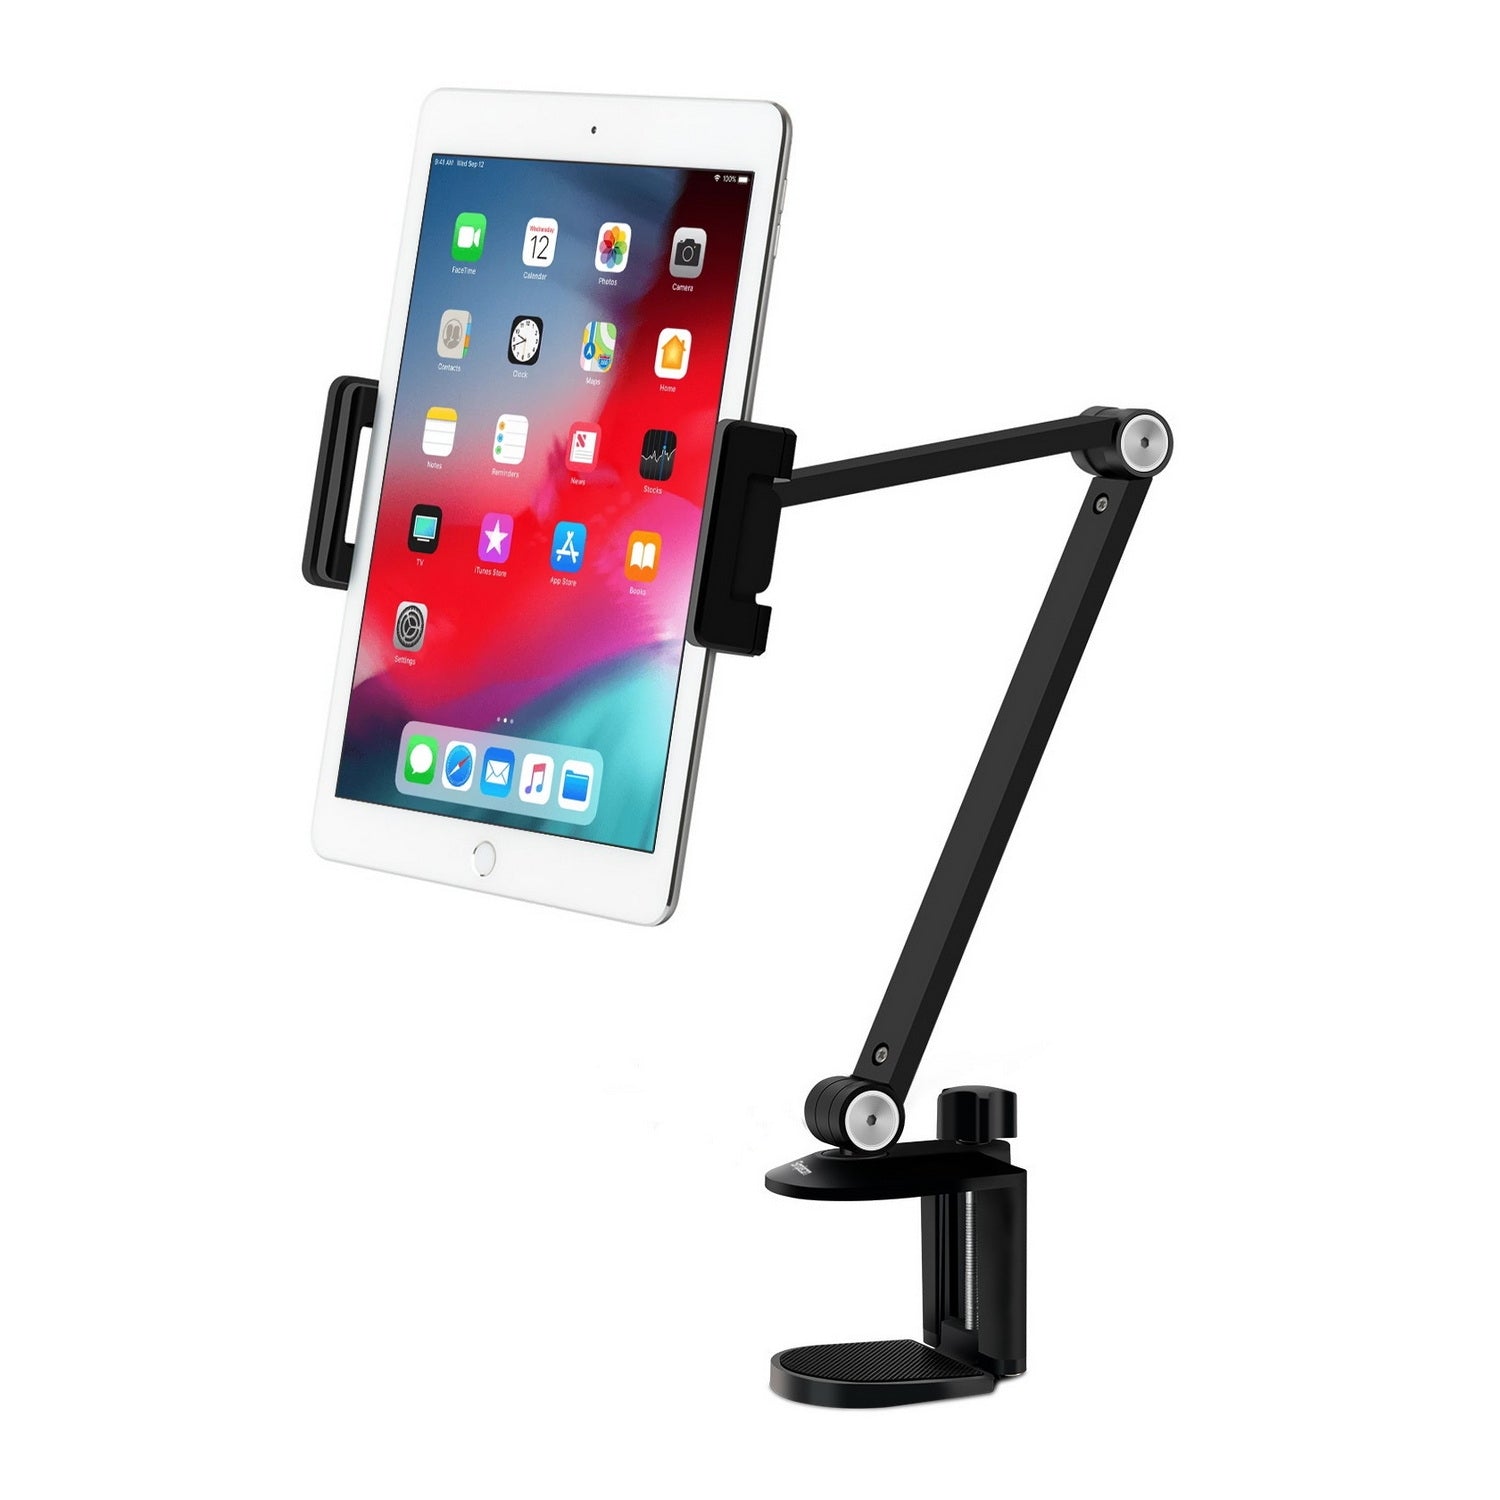 Simplecom CL519 Clamp Arm Stand for Phone and Tablet (4.5